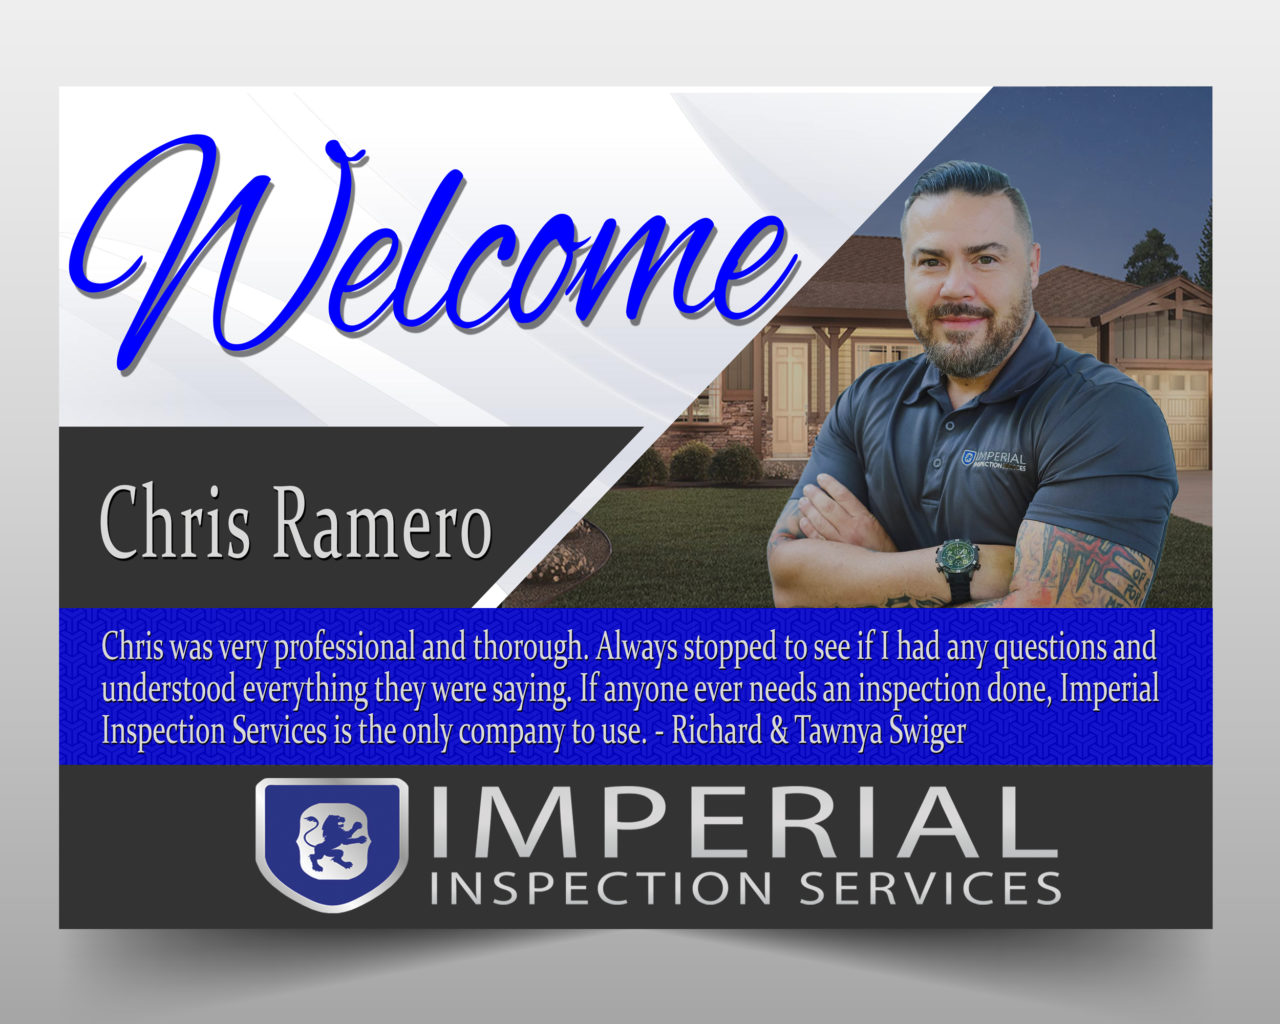 Imperial Inspection welcome by Rhonda Cosgriff Designs